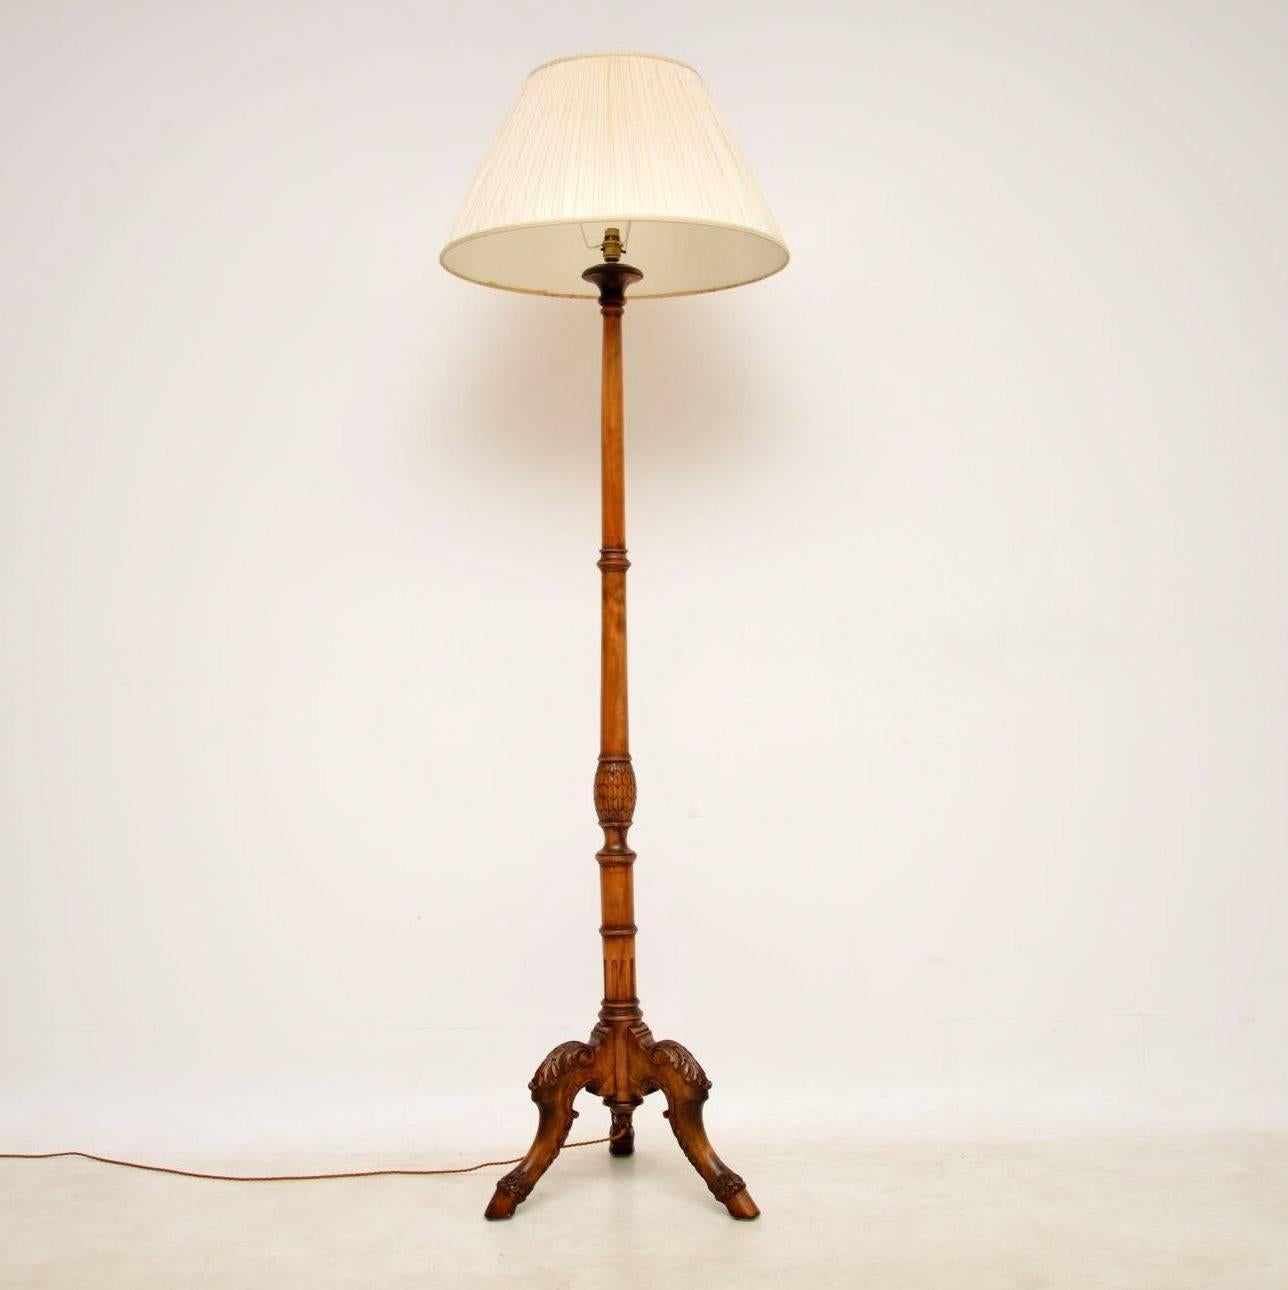 Antique carved walnut lamp stand with some fine features, in good original condition and dating to circa 1890-1910 period. This lamp stand is working and we just had it re-wired with a gold flex fabric. The shade came with it and I think it suites